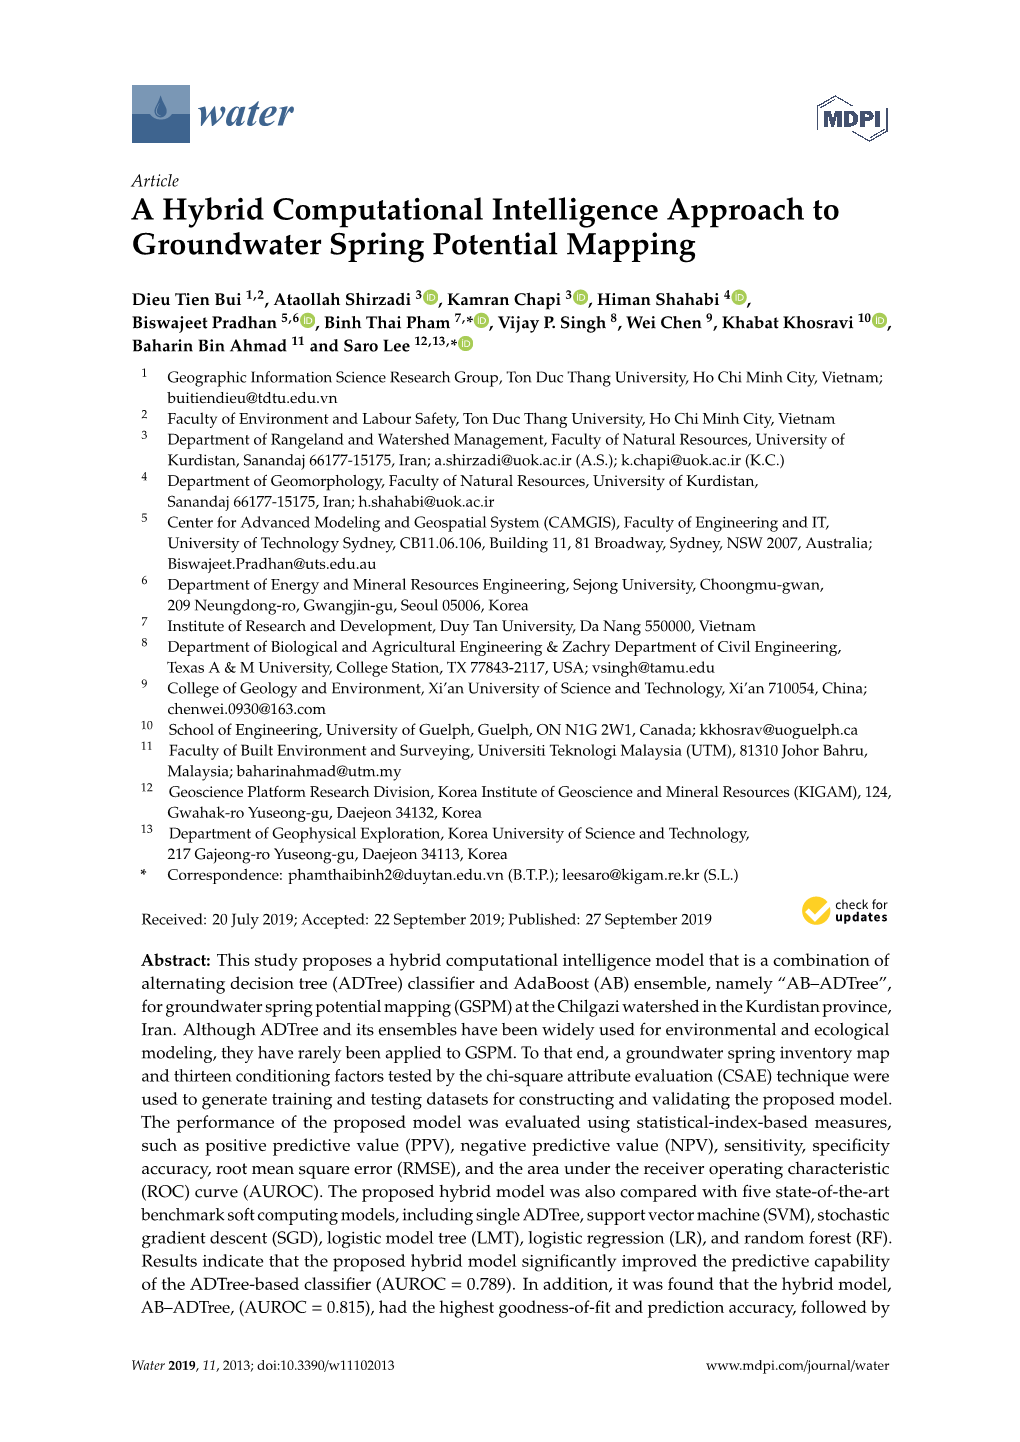 A Hybrid Computational Intelligence Approach to Groundwater Spring Potential Mapping